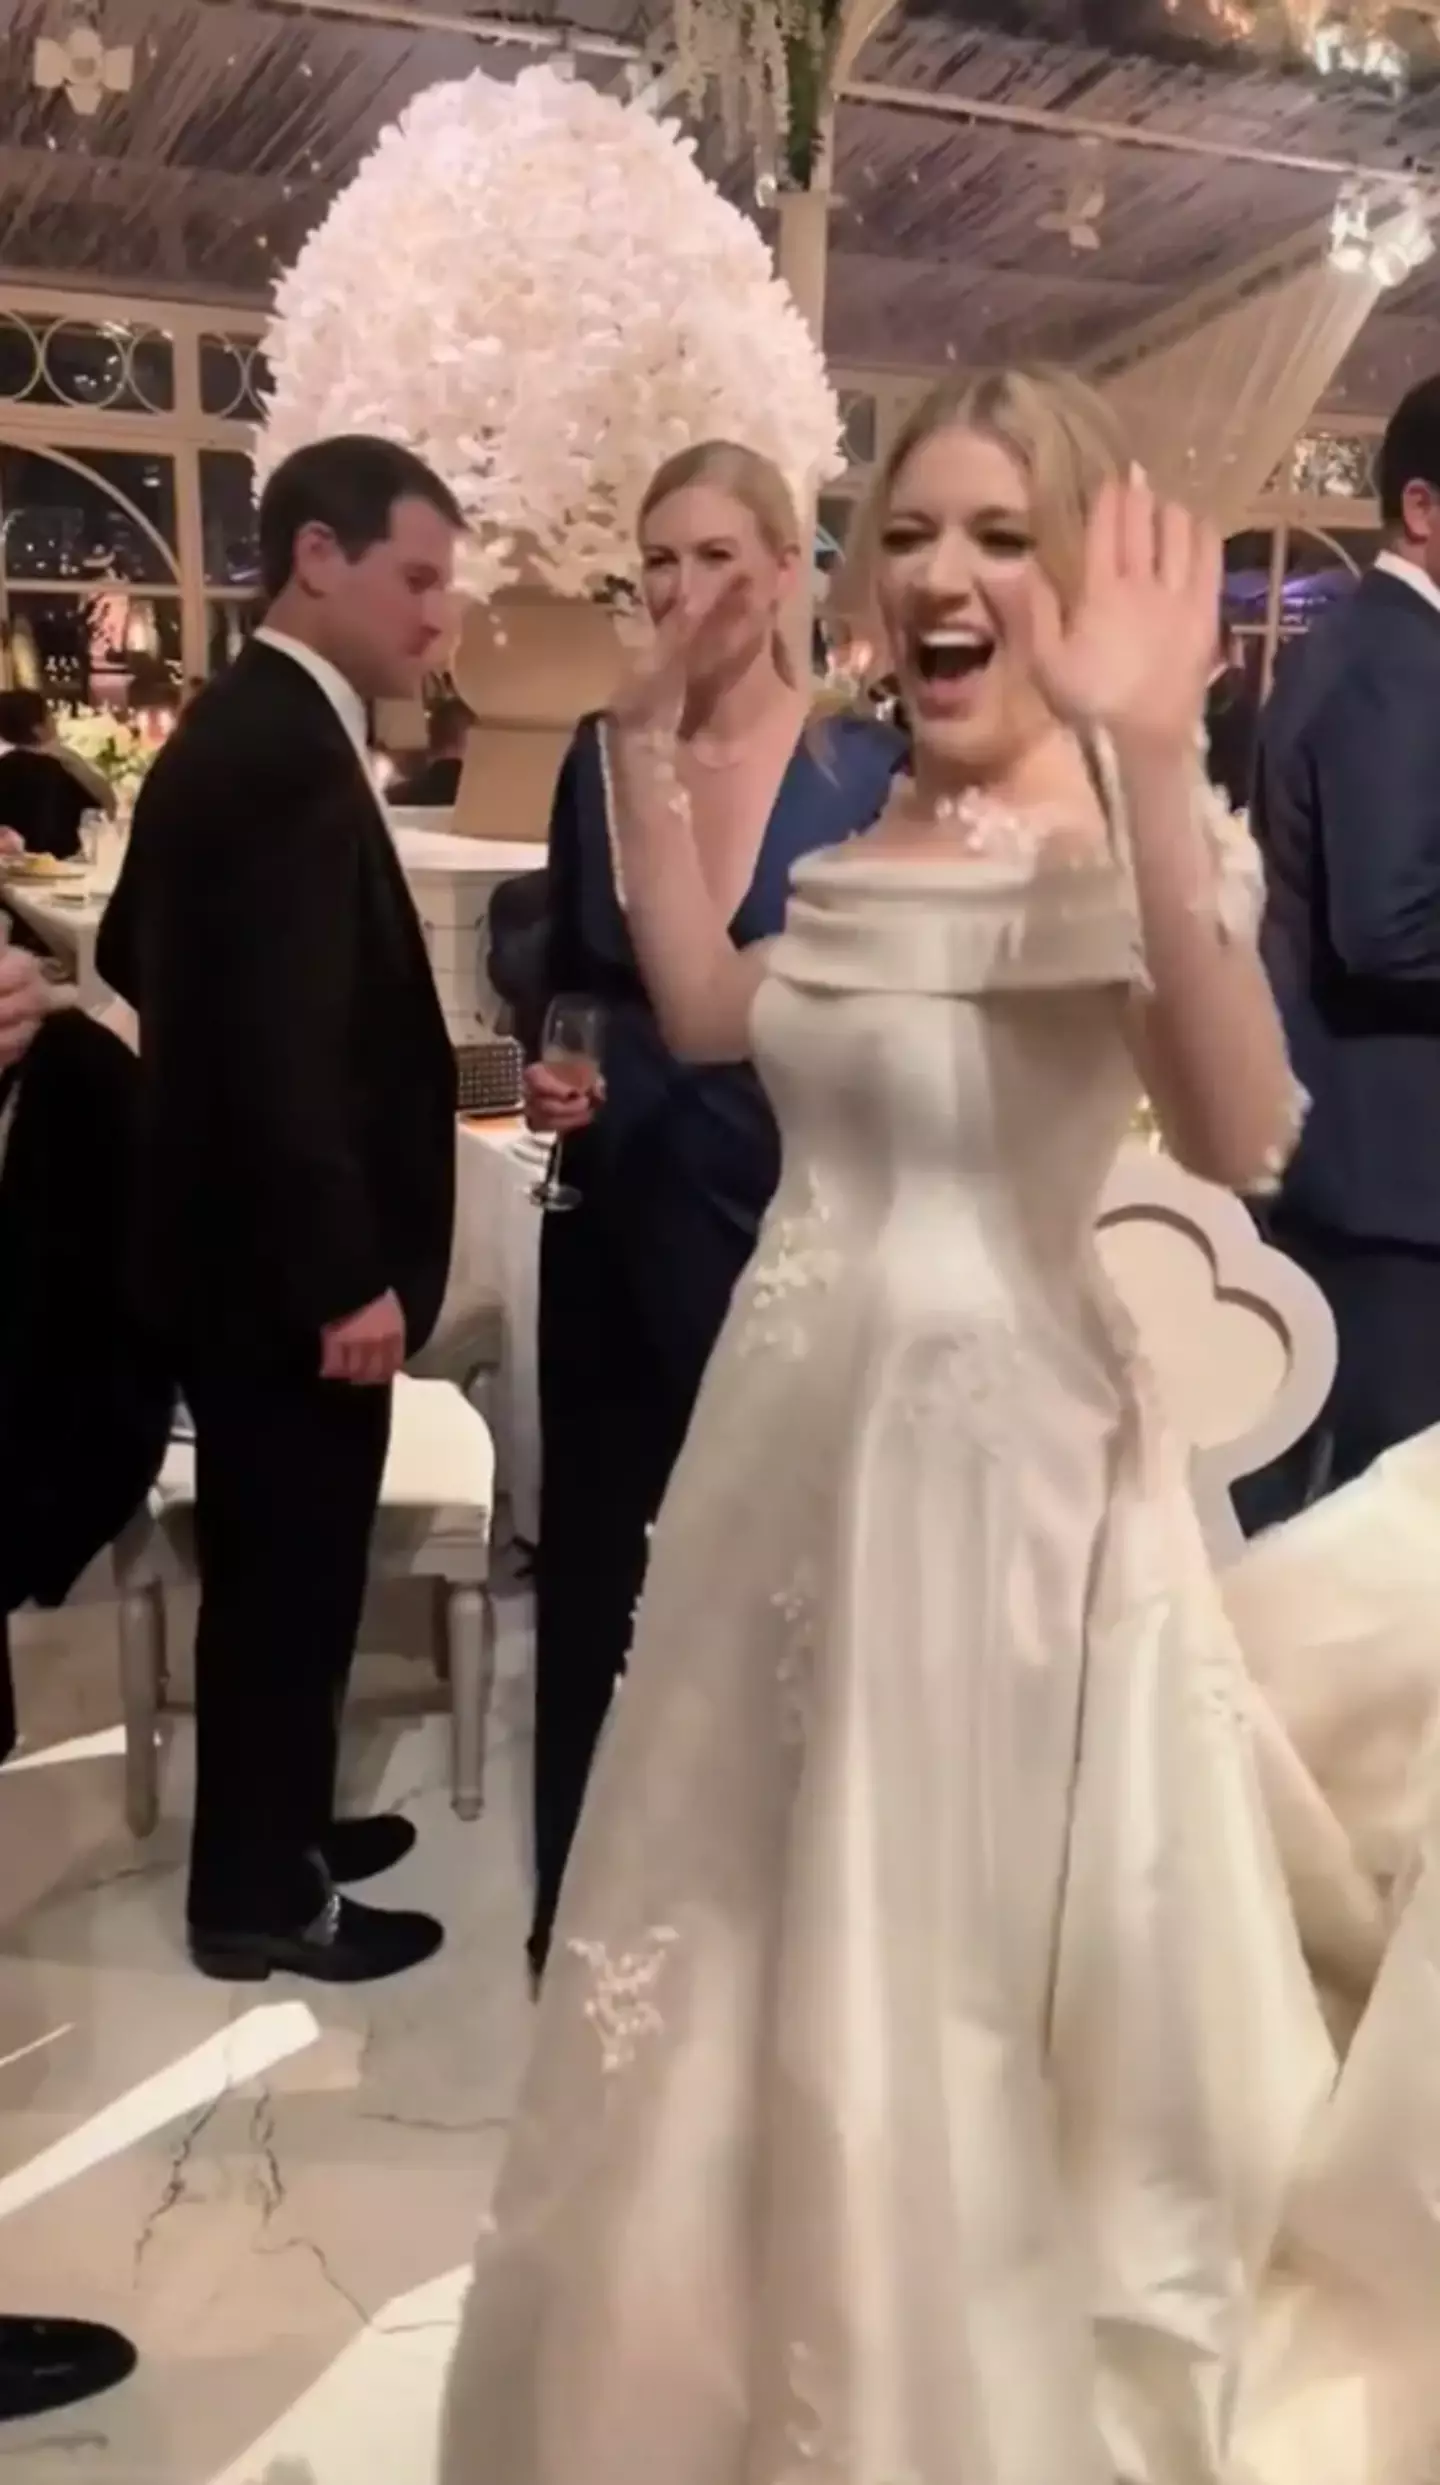 Bride Madelaine has since deleted her TikTok account.